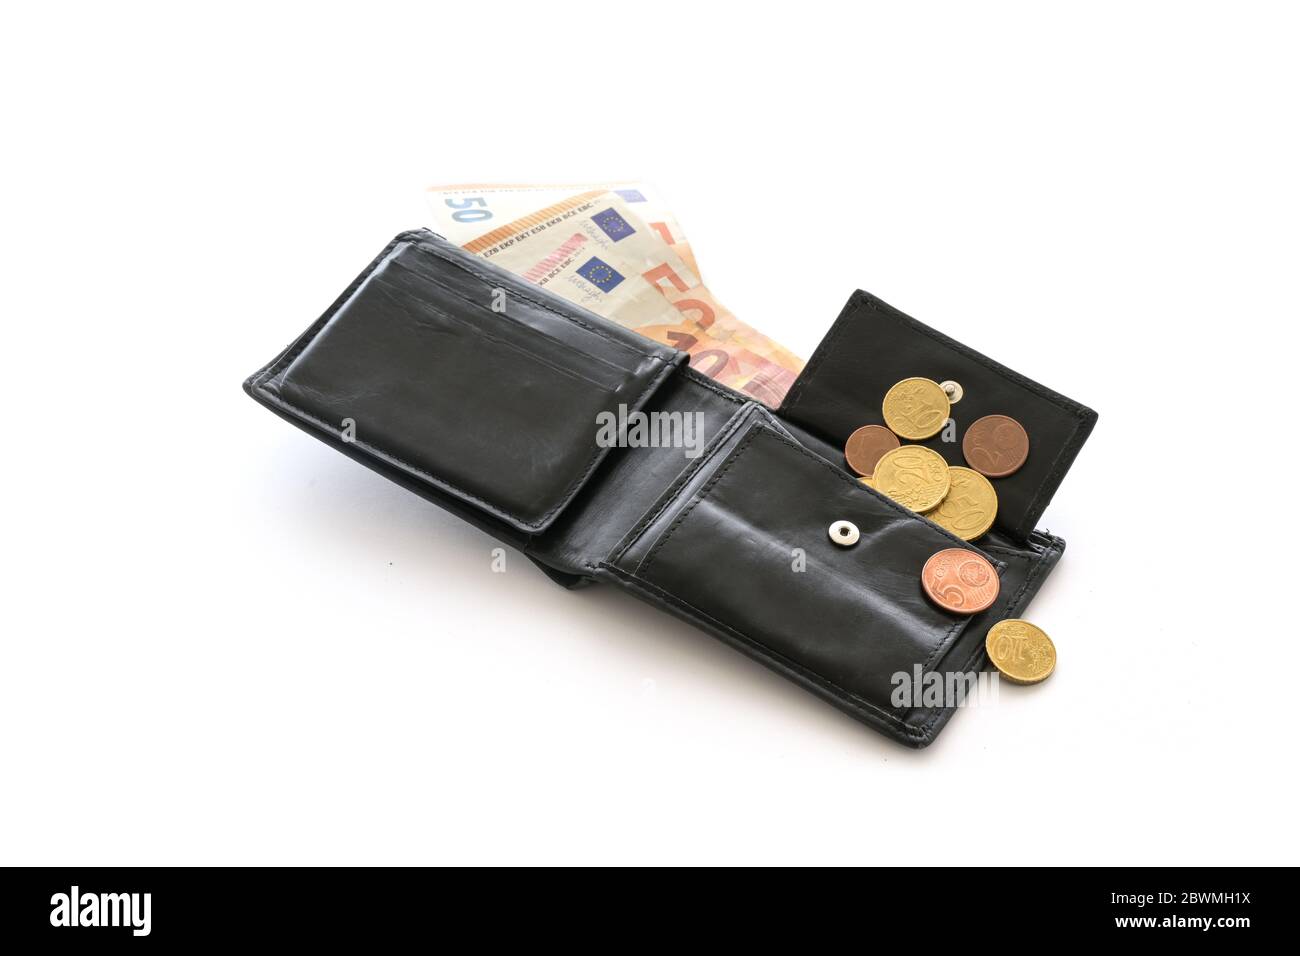 Open money purse with a few euro coins and notes, cash check, debt and poverty in the economic crisis affected by coronavirus, isolated on a white bac Stock Photo